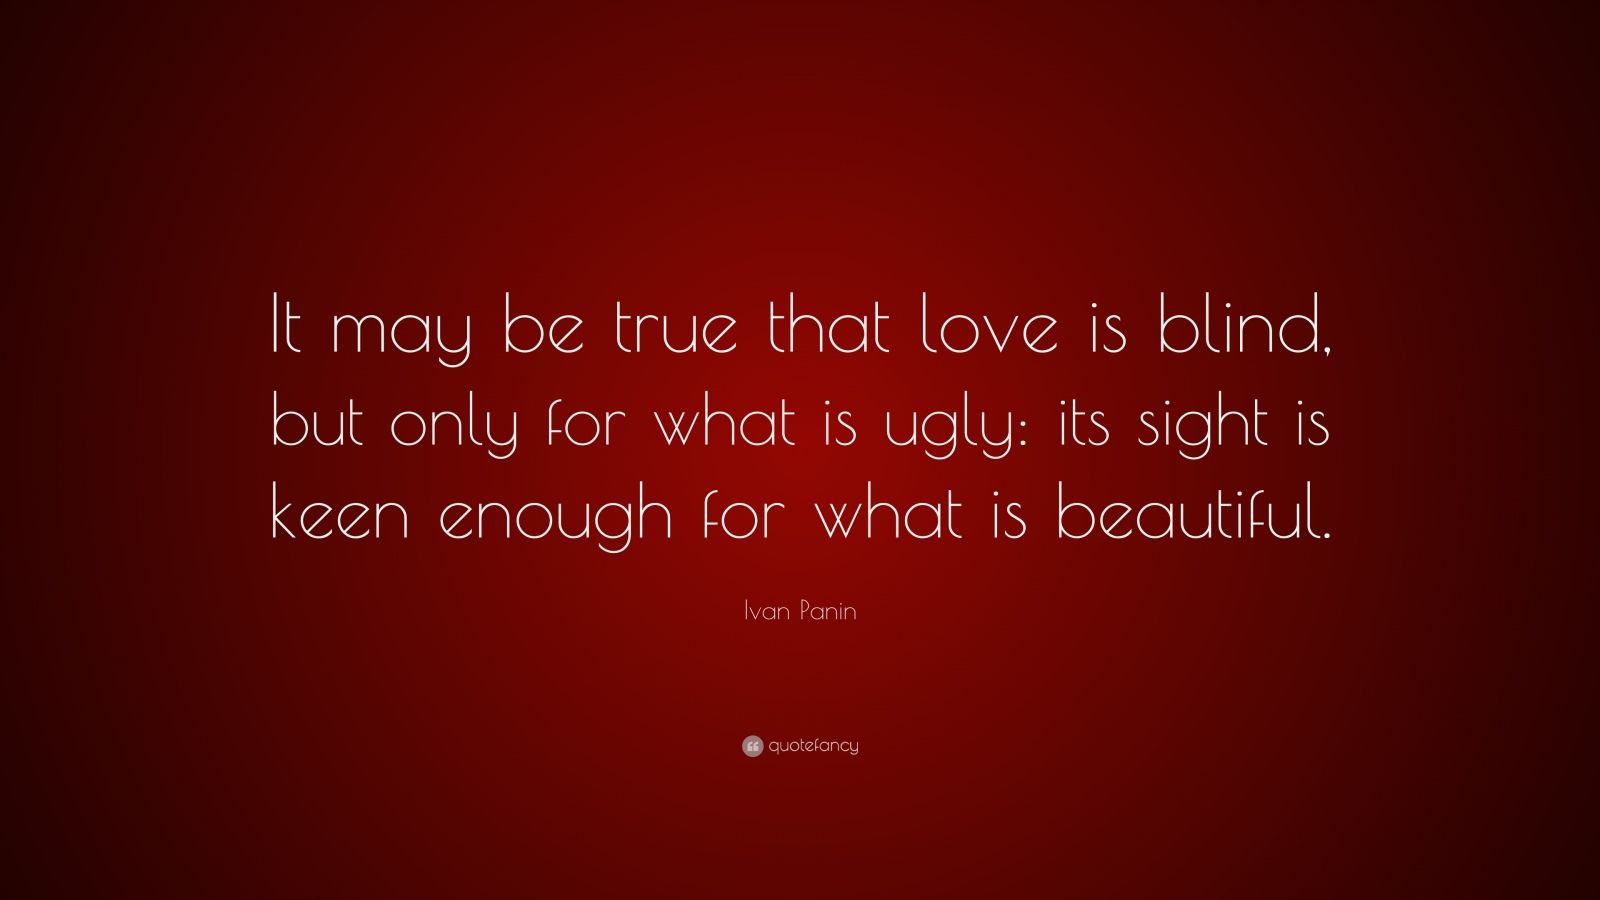 Ivan Panin Quote “It may be true that love is blind but only